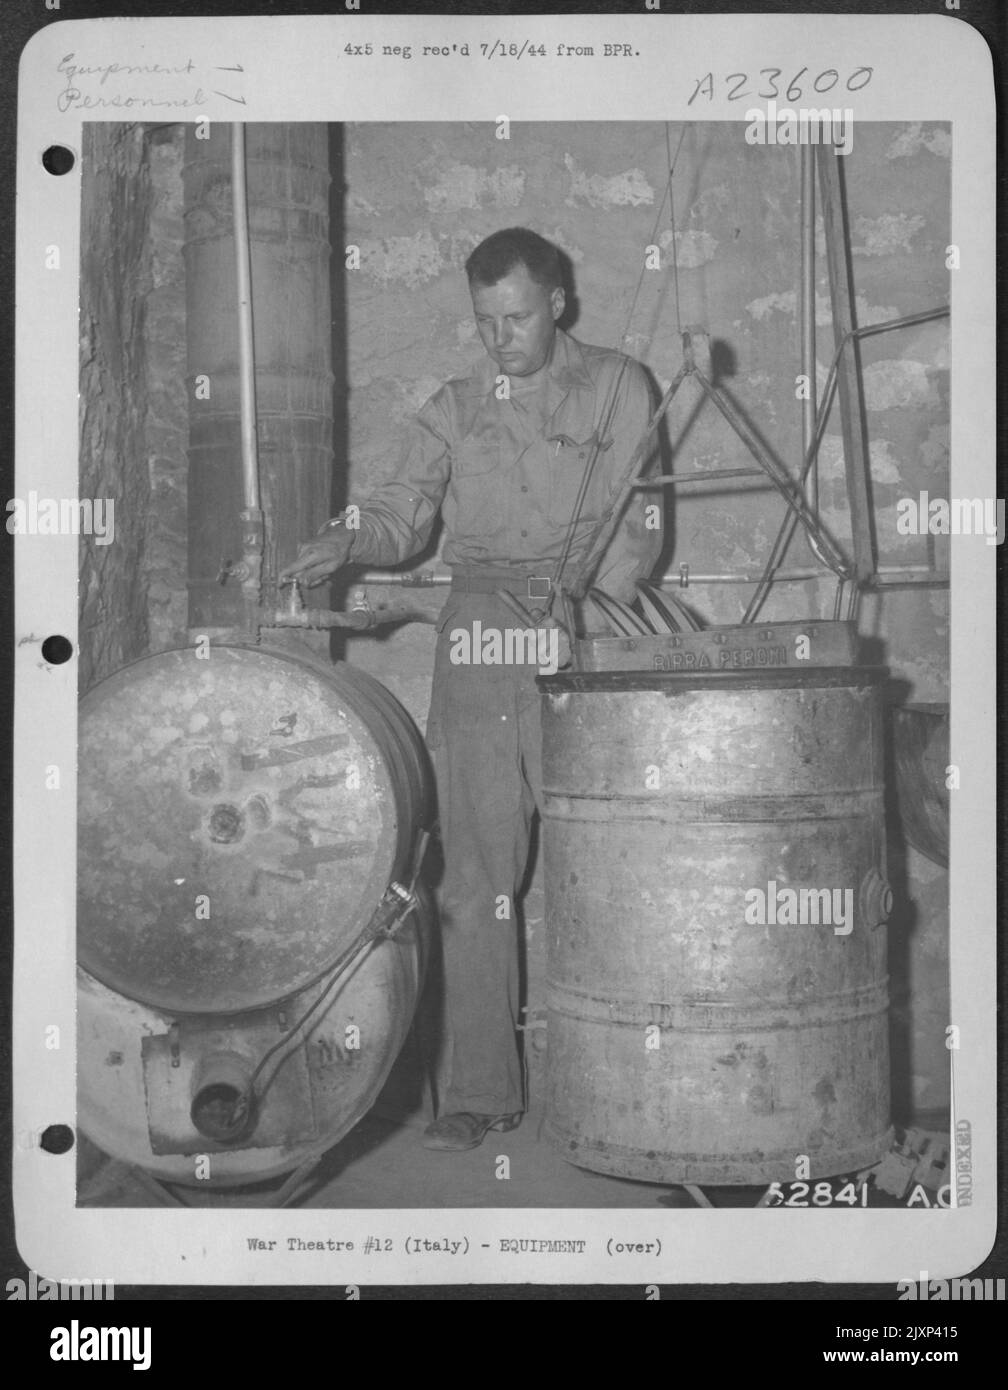 ITALY-Photographic report of improvised sanitary devices. Gasoline drums in left of photo are used as heating unit for dish washing device. Materials for heating unit: 40-feet 3/4 inch pipe and fittings or 1 1/2 inch tubing salvaged from planes many Stock Photo